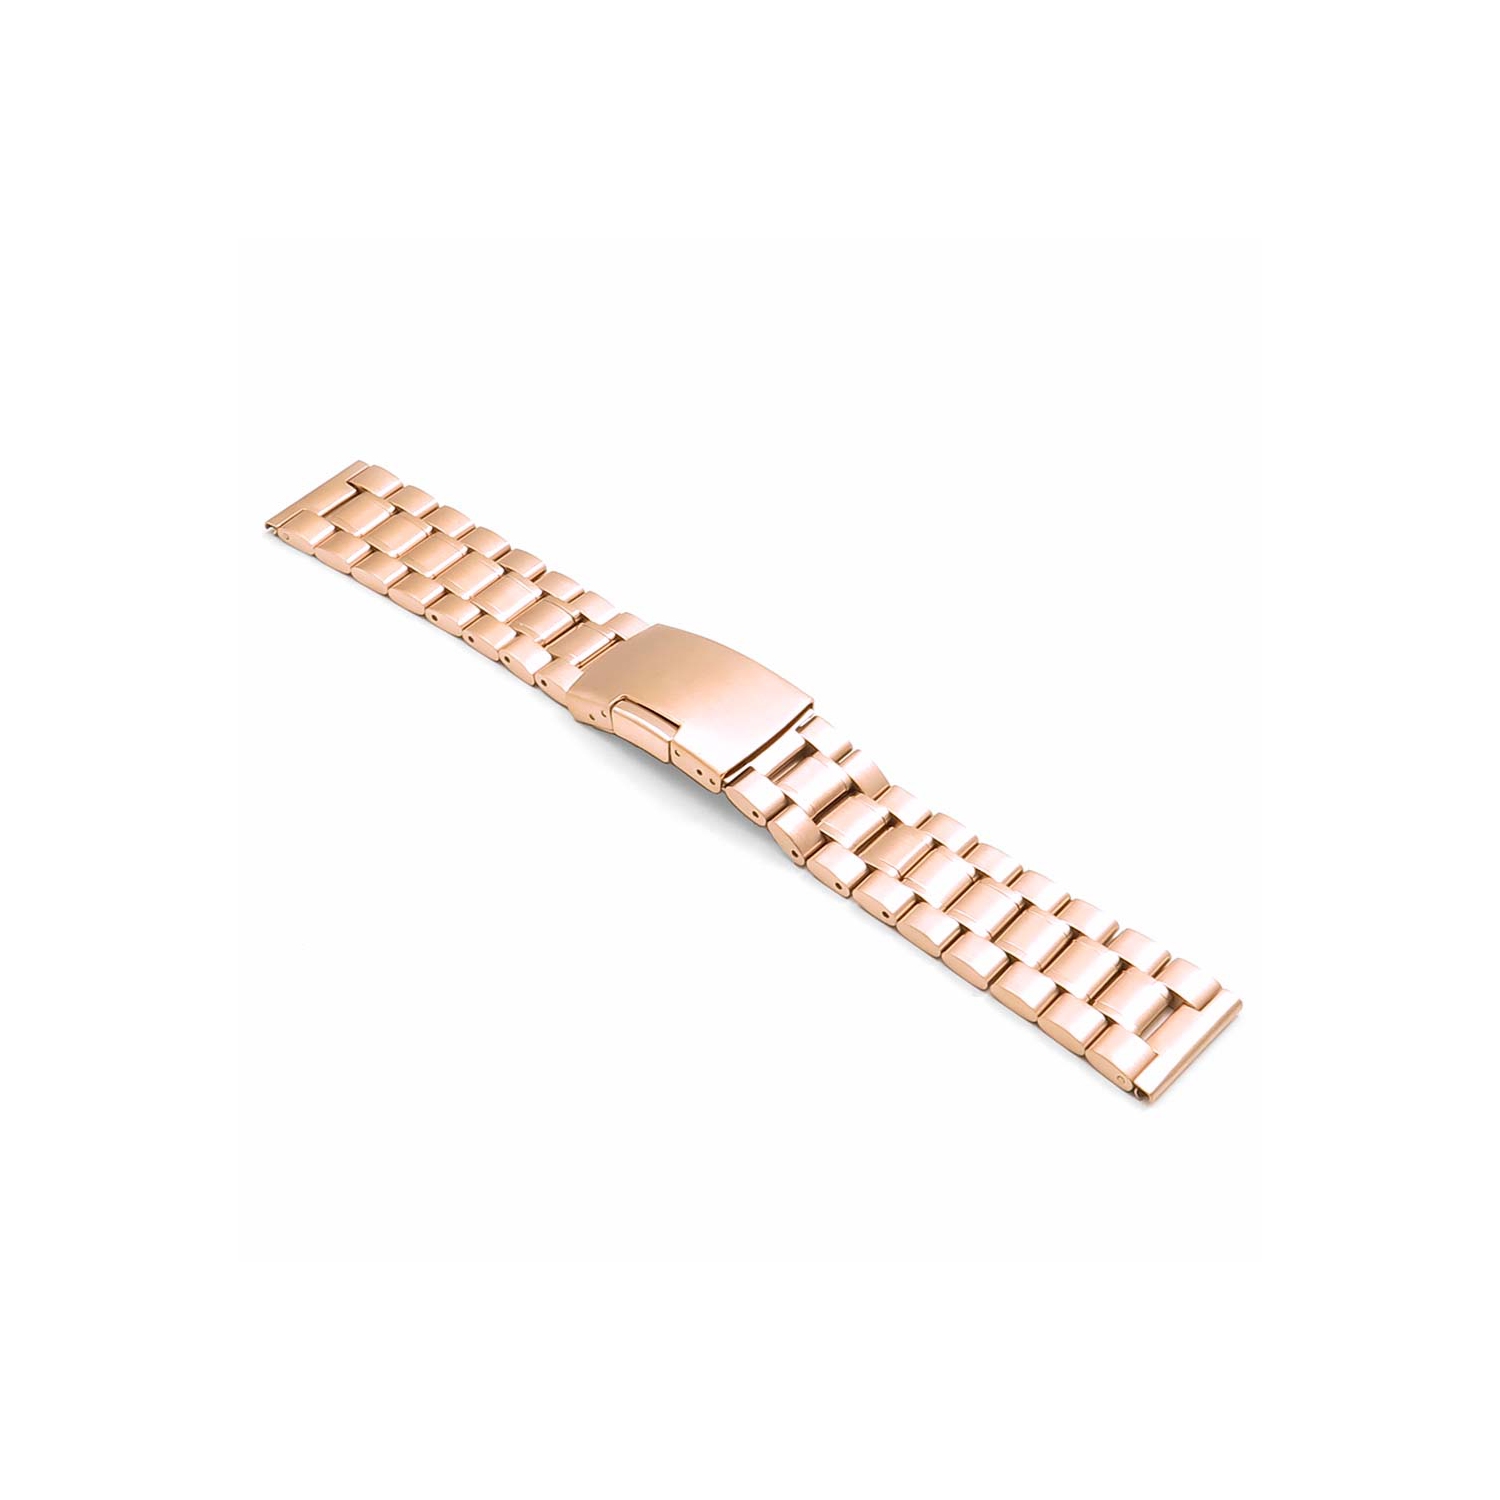 StrapsCo Stainless Steel Oyster Watch Band Strap for Samsung Galaxy Watch Active - Rose Gold